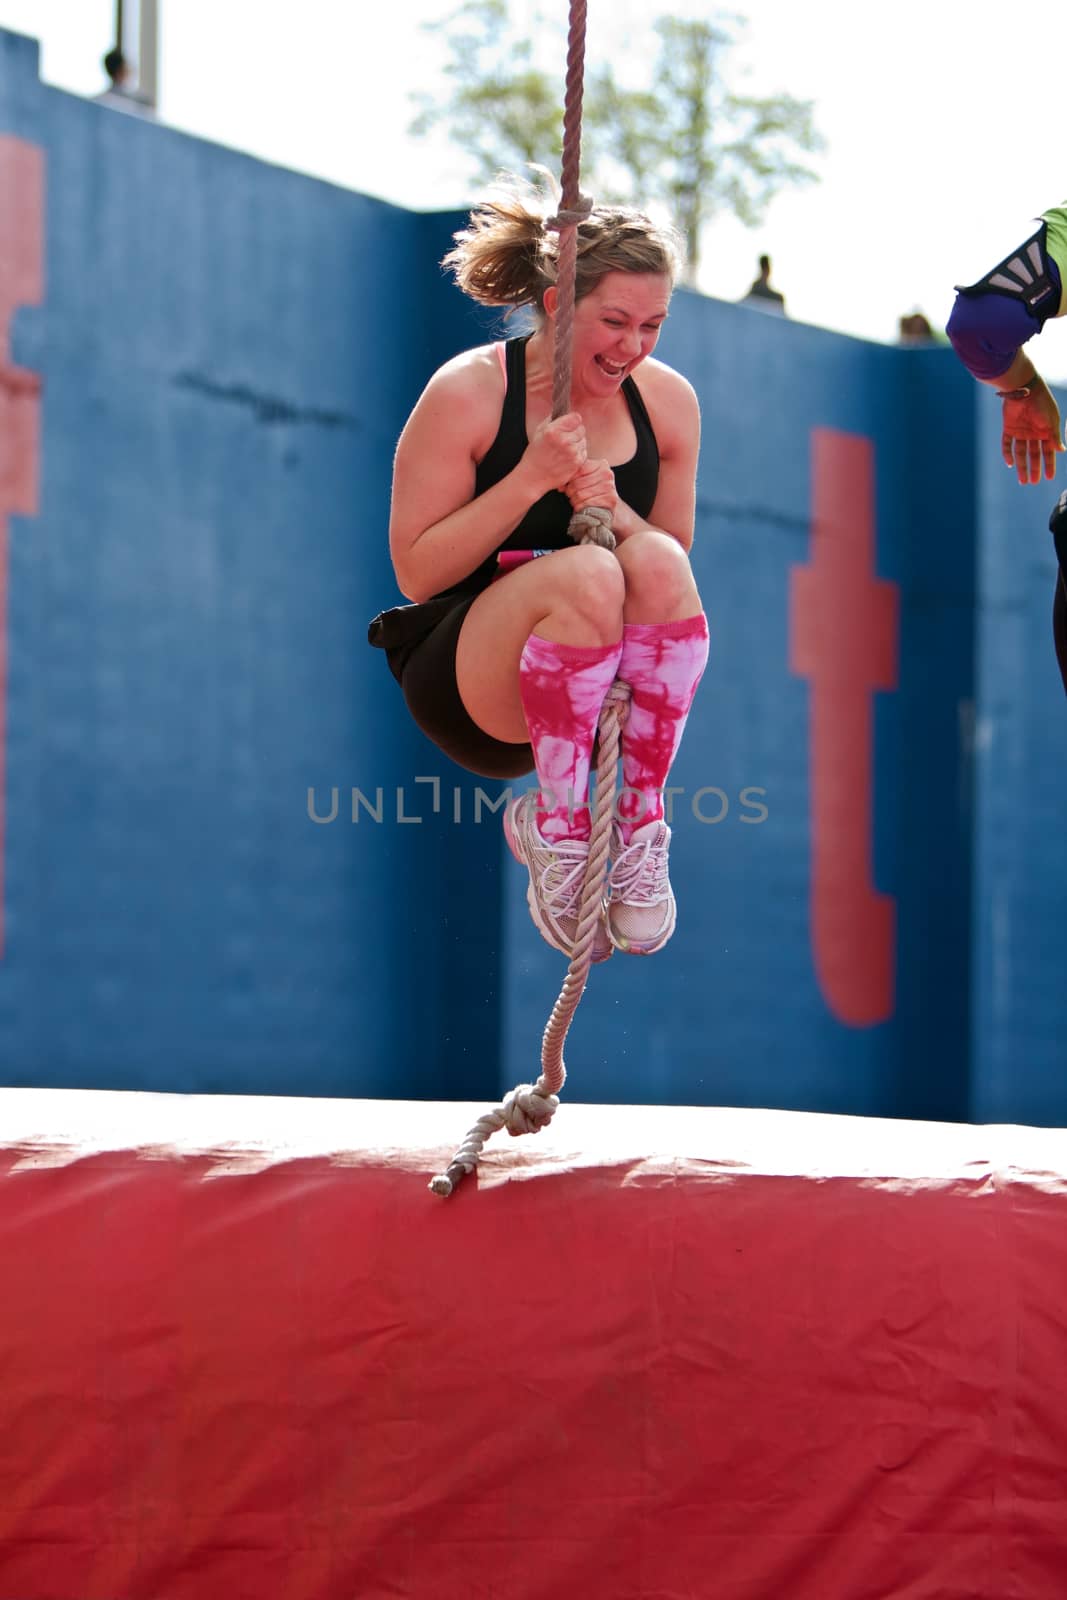 Atlanta, GA USA - April 5, 2014:  A young woman swings a rope across an obstacle in one of the events at the Ridiculous Obstacle Challenge (ROC) 5K race.